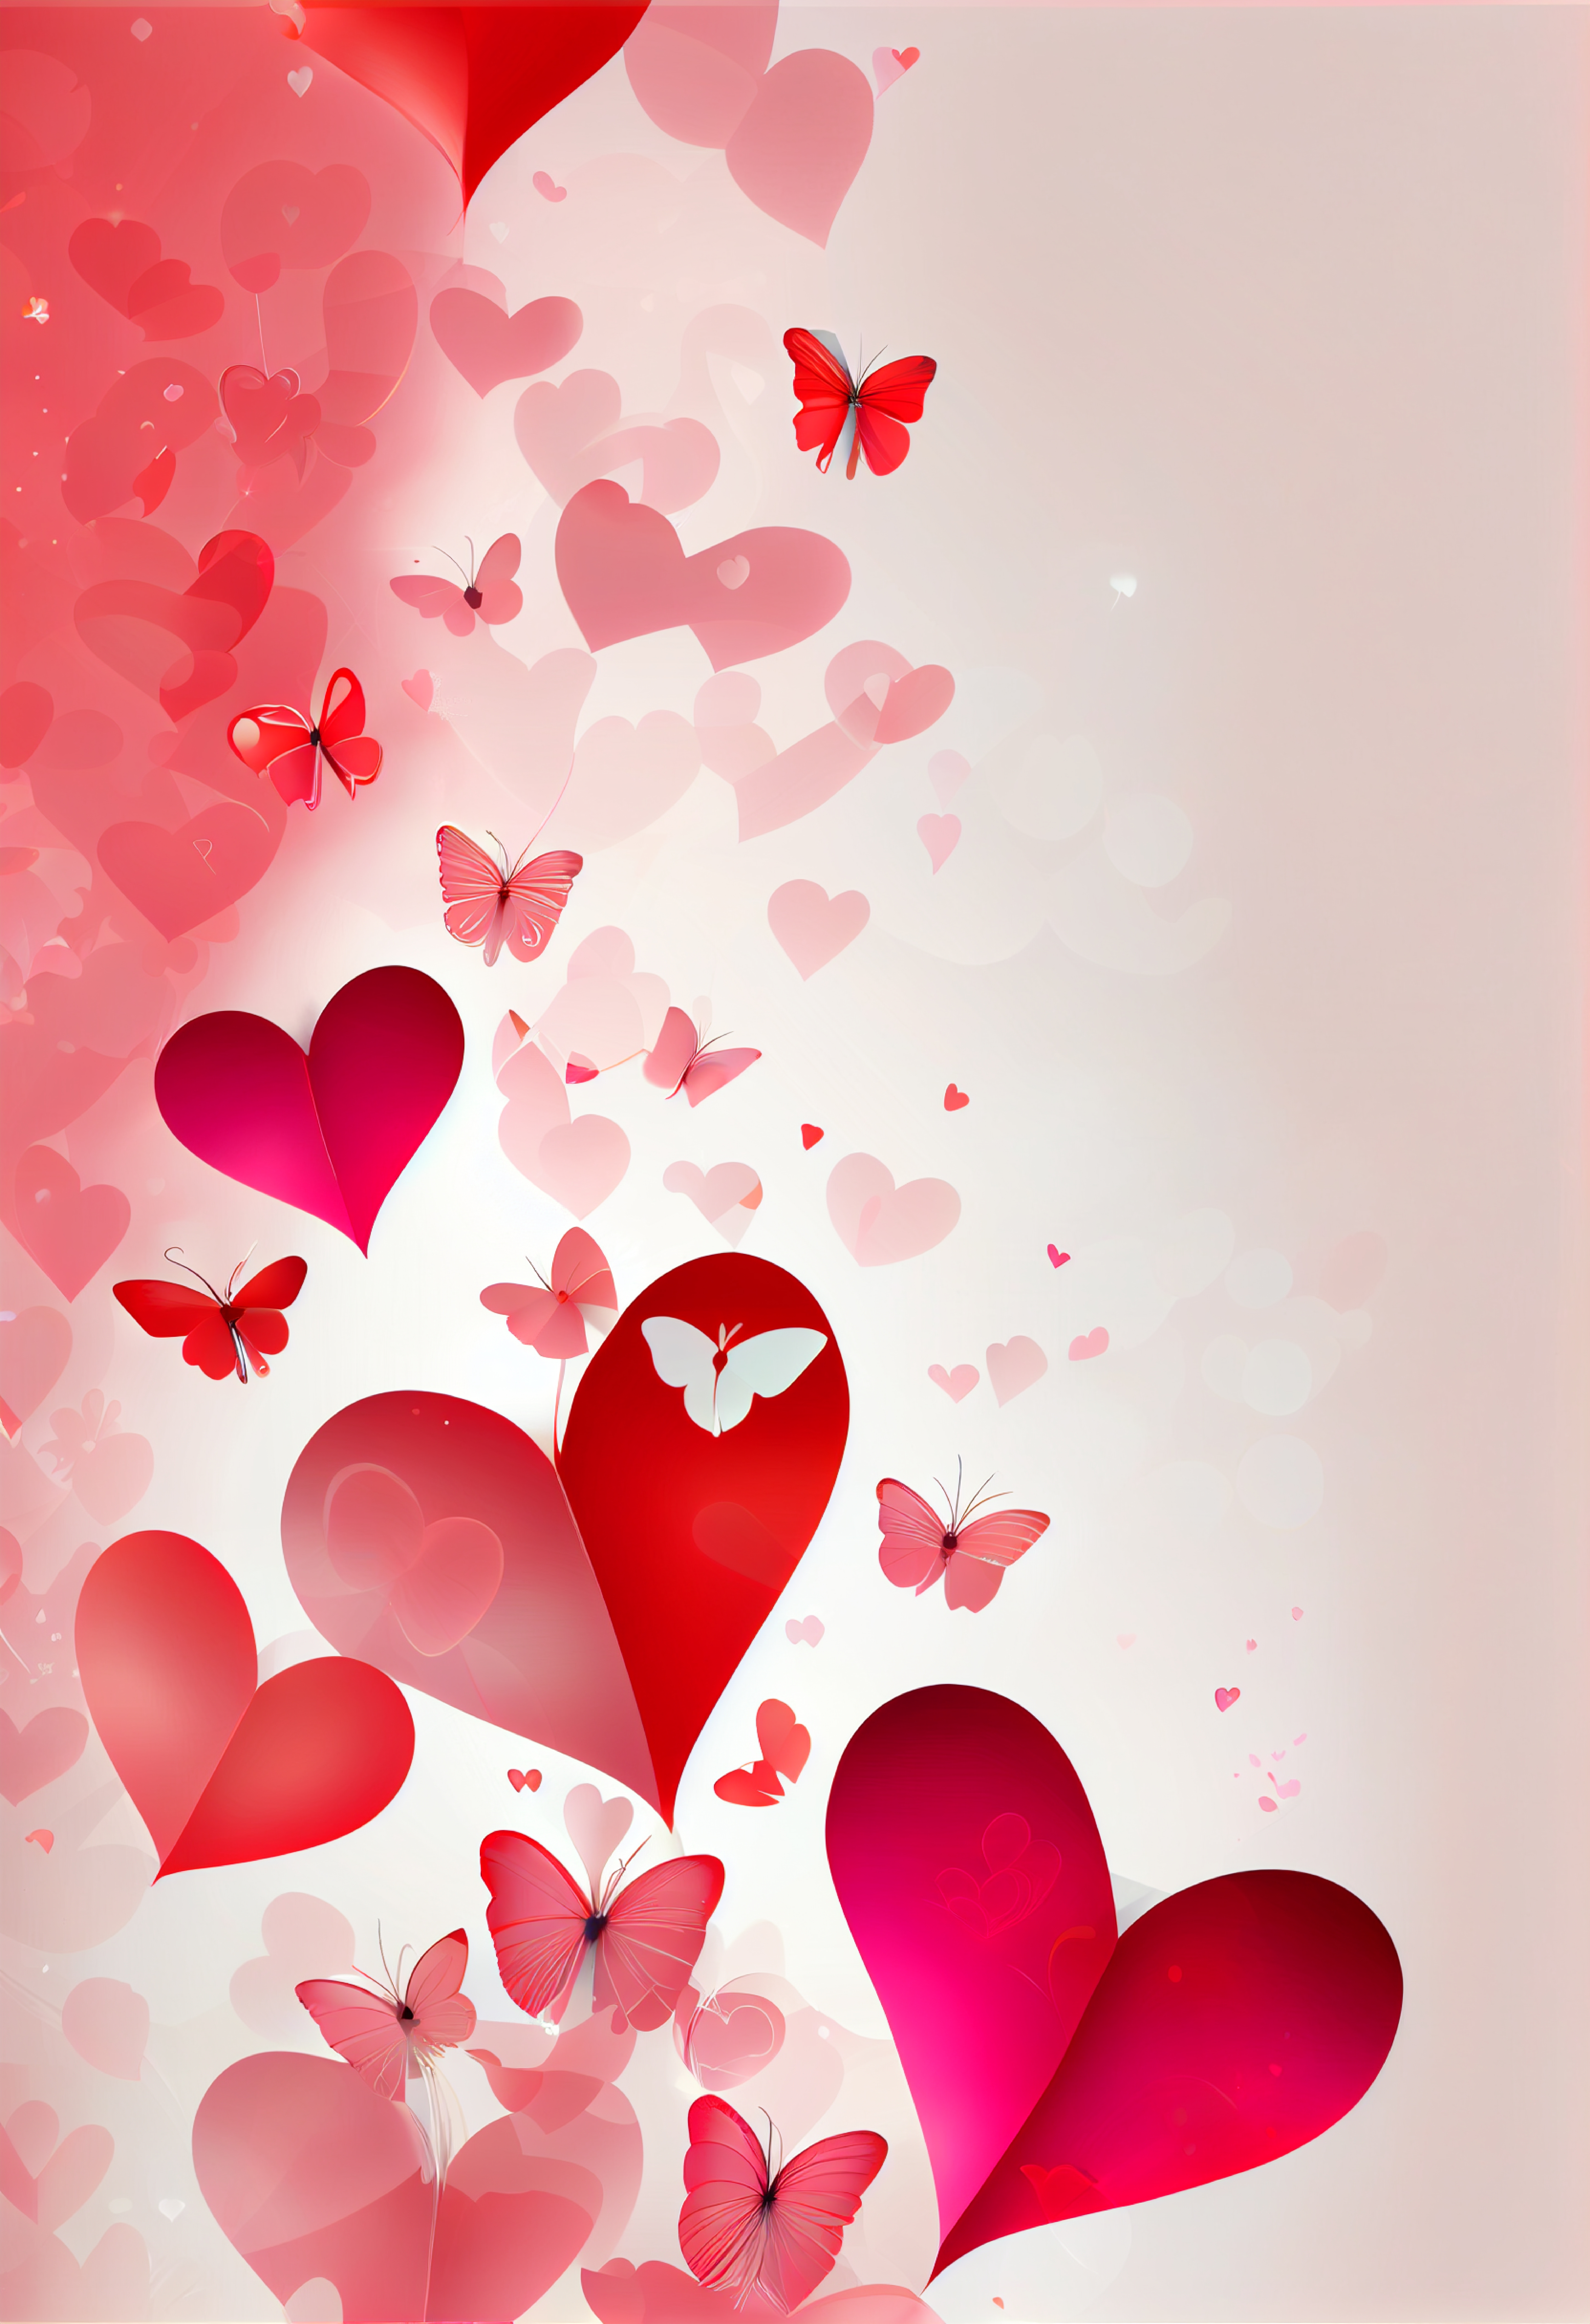 Free Valentines Day Background With Hearts And Butterflies, 53% OFF